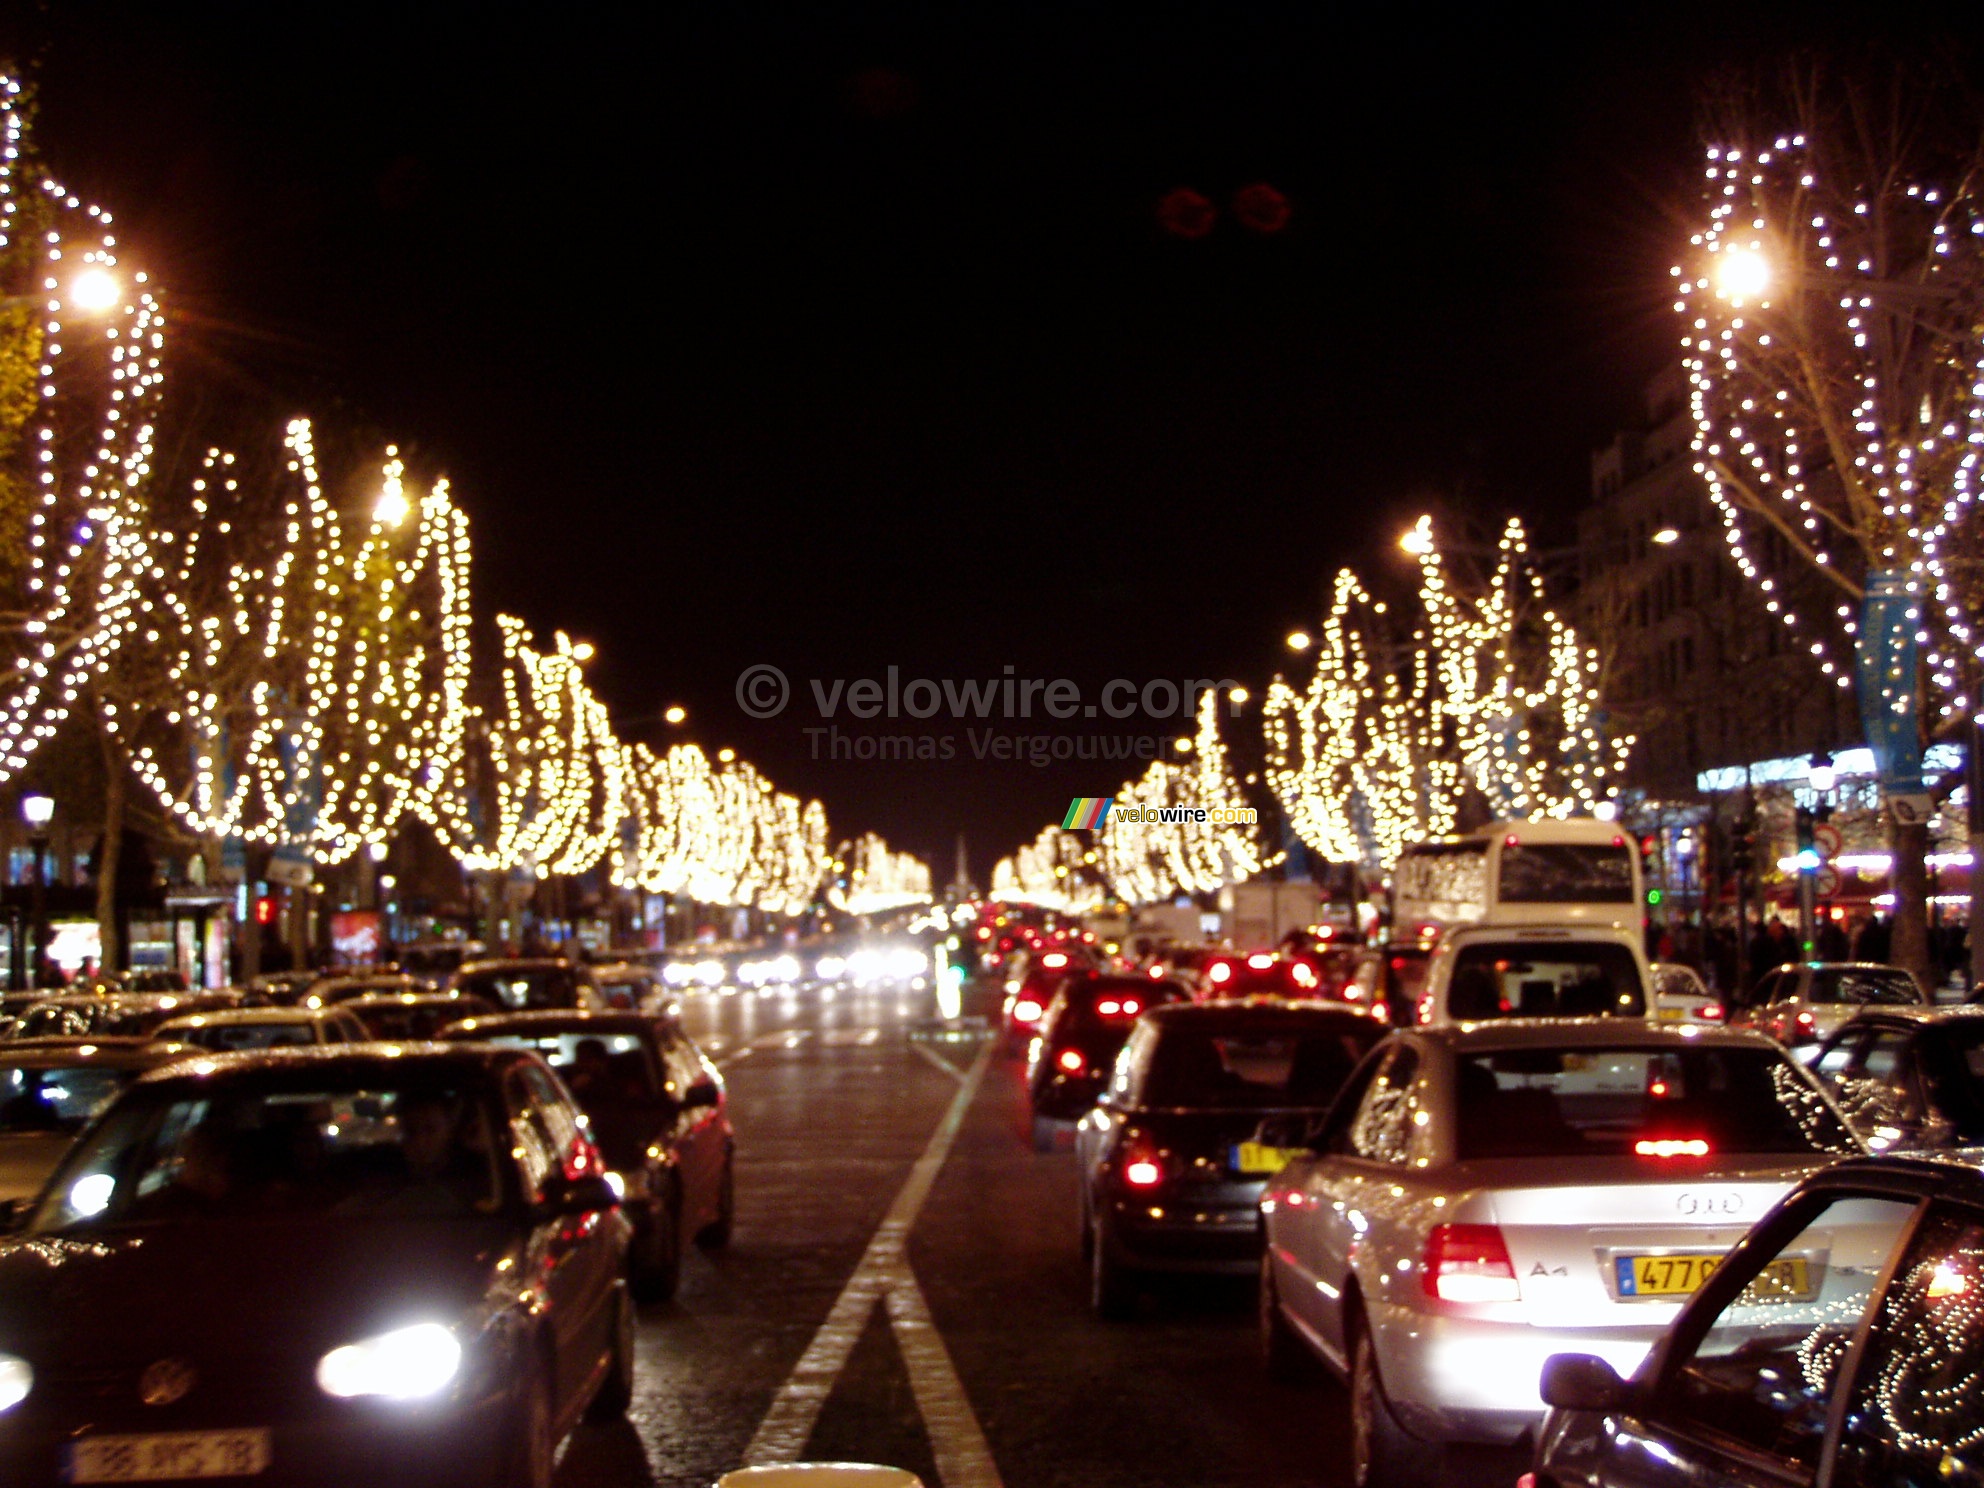 The lights at the Champs-Elyses